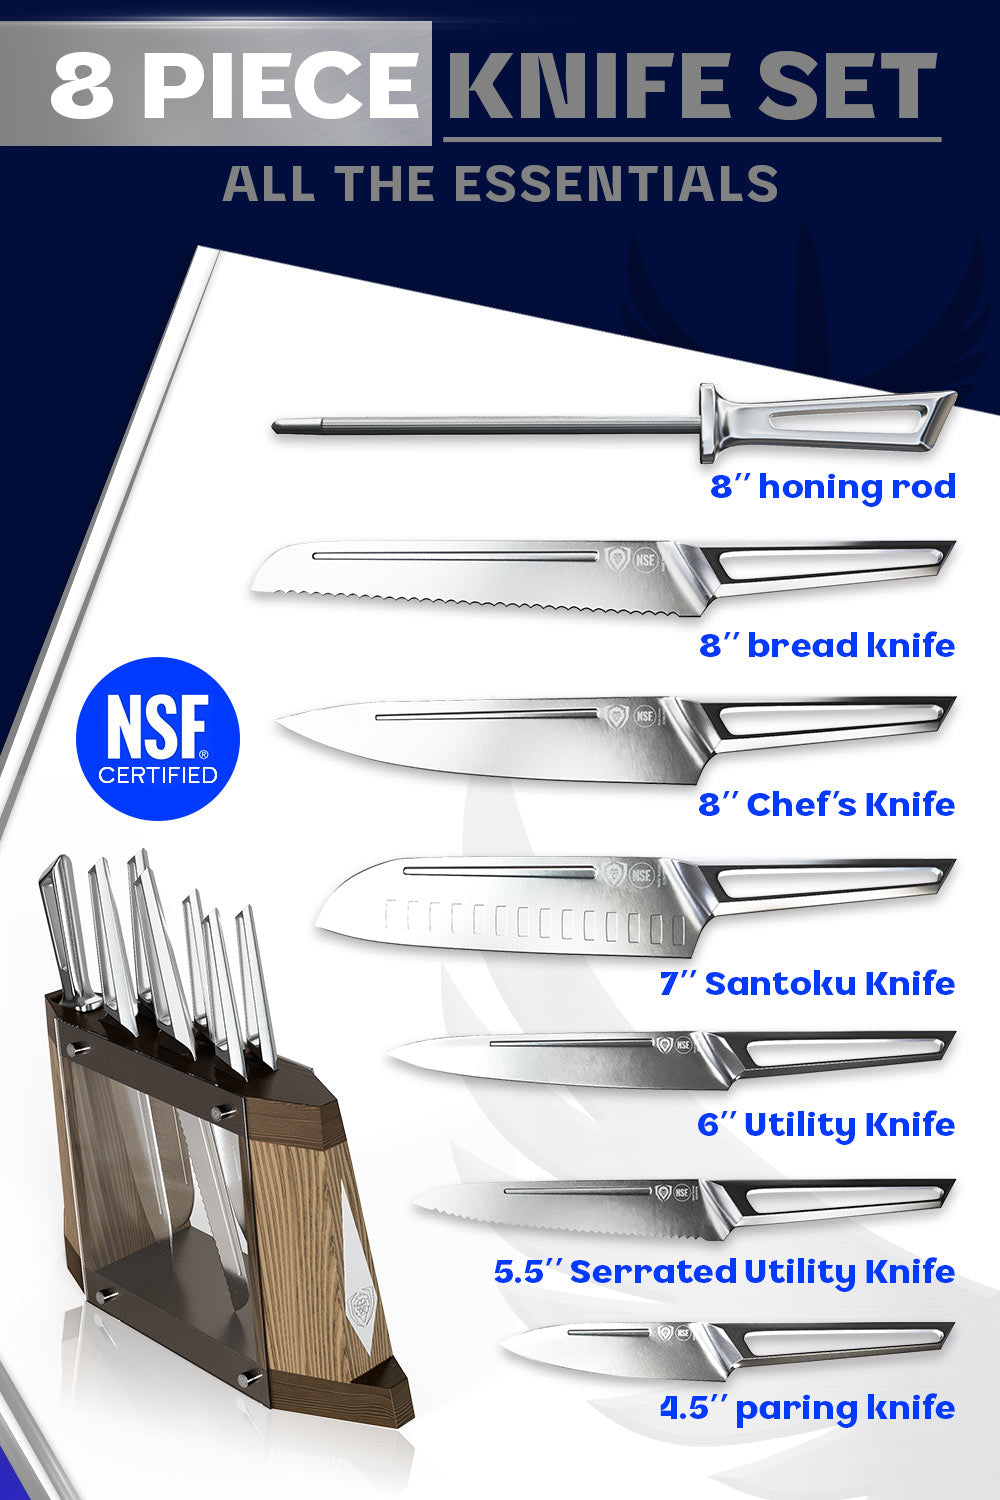 Dalstrong crusader series 8 piece knife block set featuring it's complete set of knives.